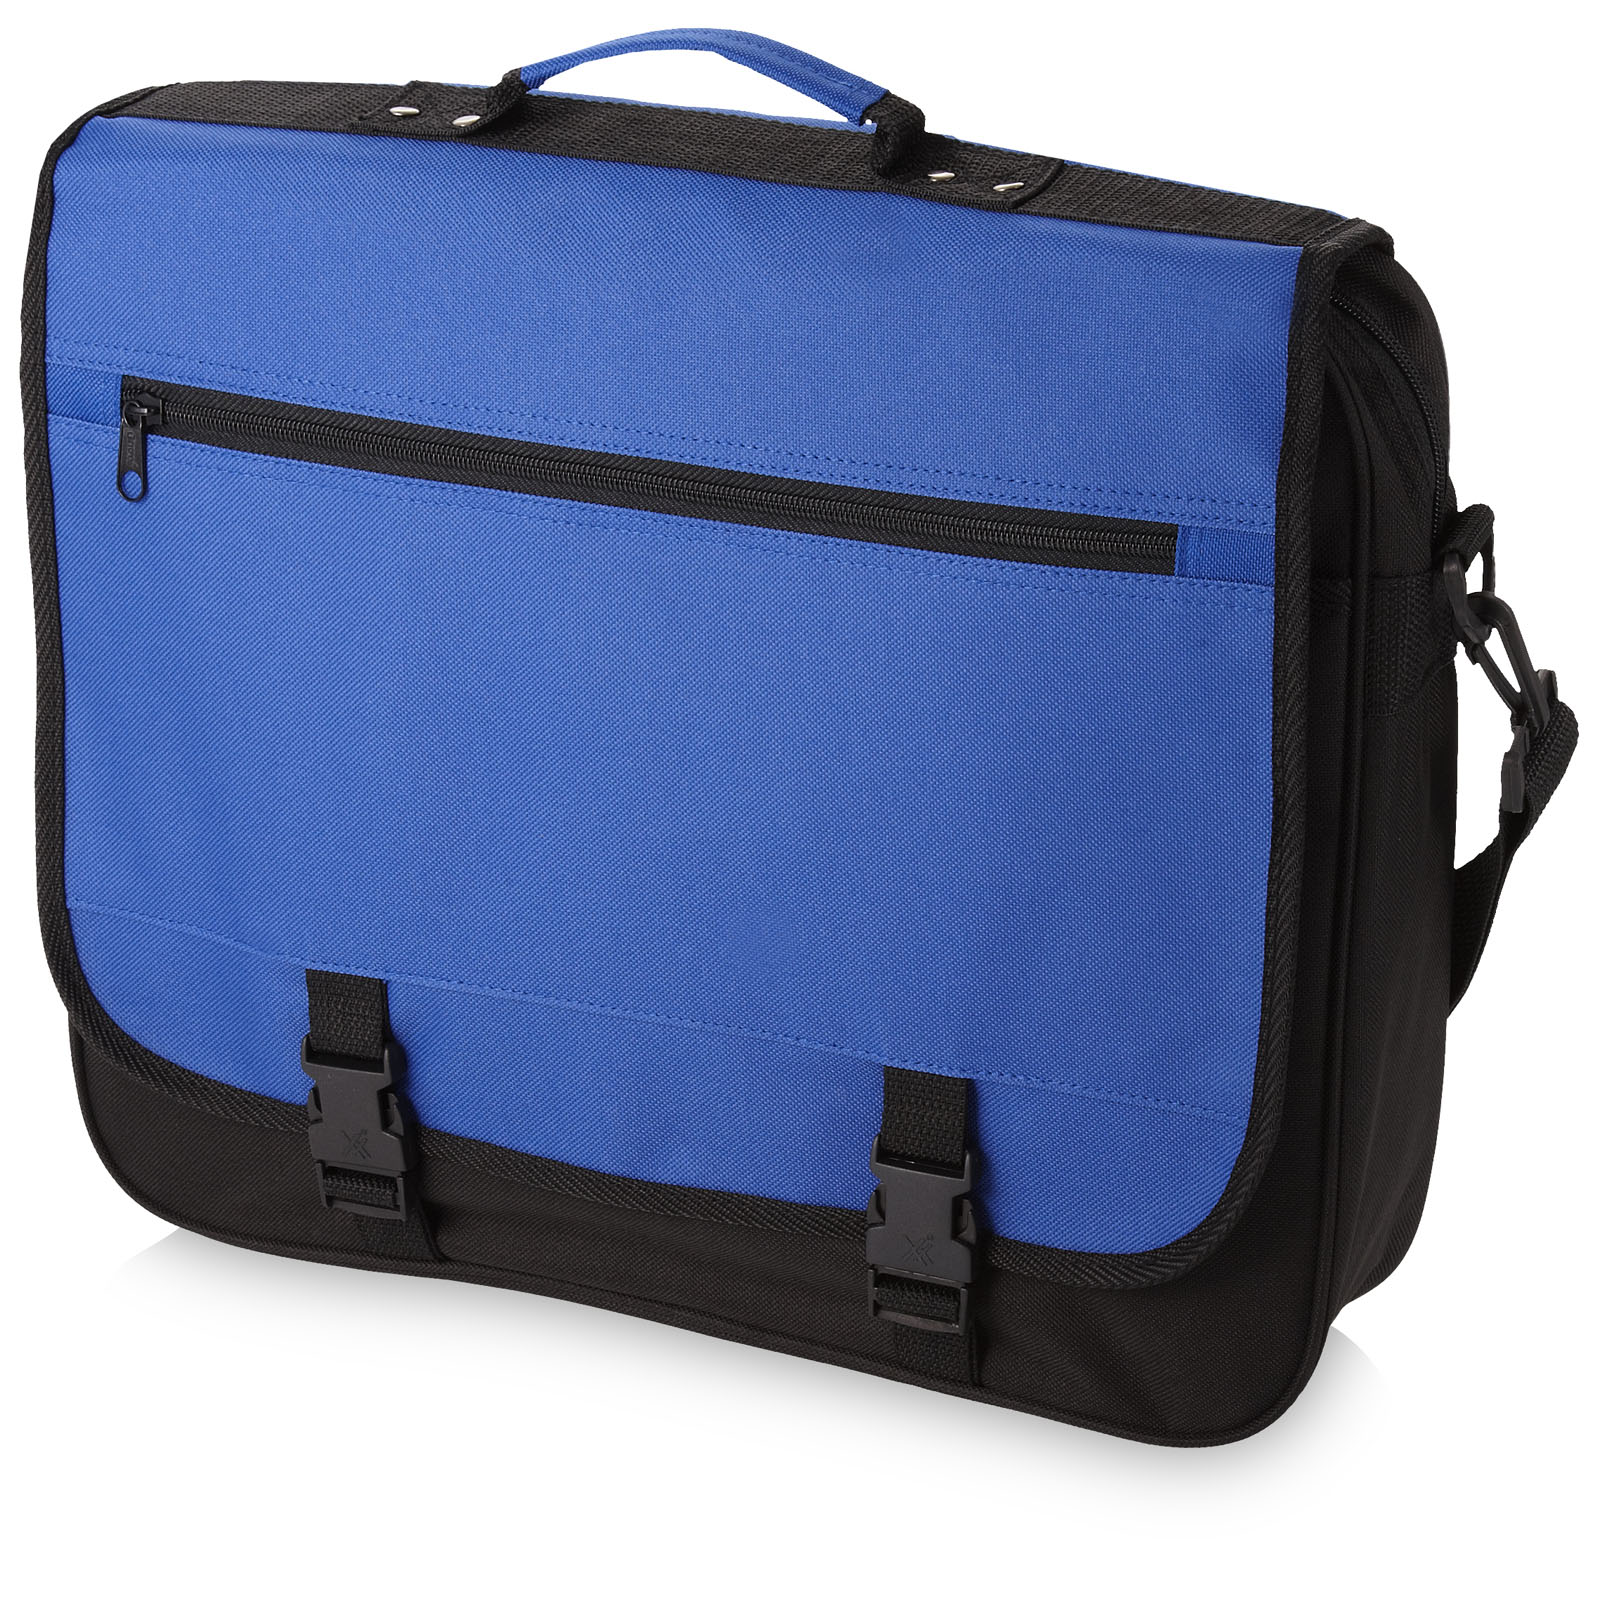 Advertising Conference bags - Anchorage conference bag 11L - 0